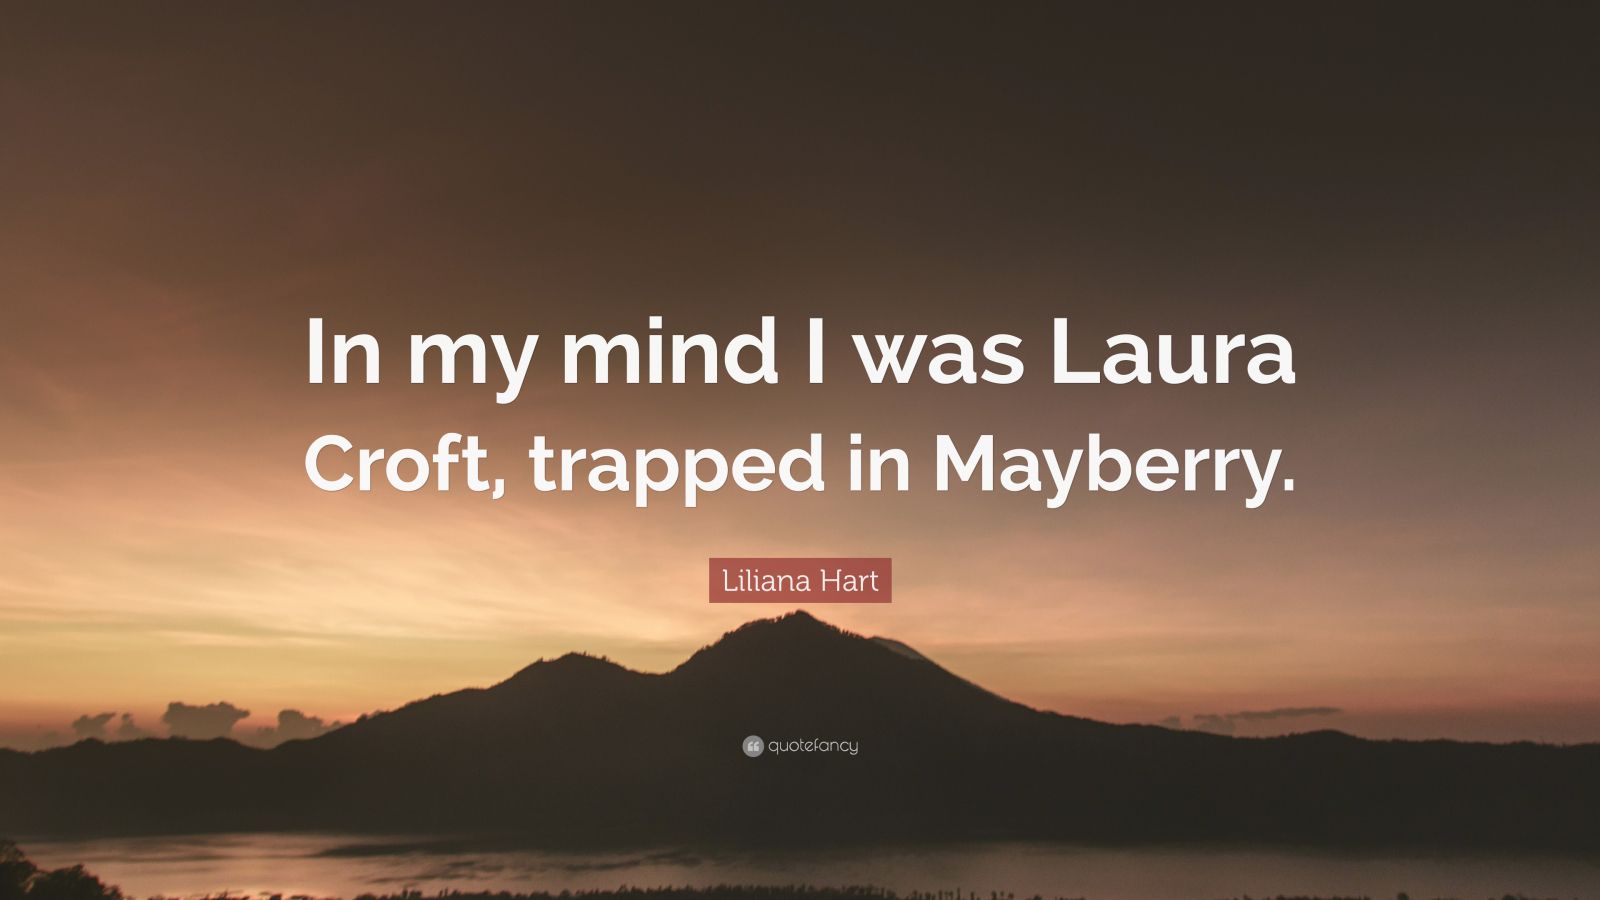 Liliana Hart Quote: “In my mind I was Laura Croft, trapped in Mayberry.”